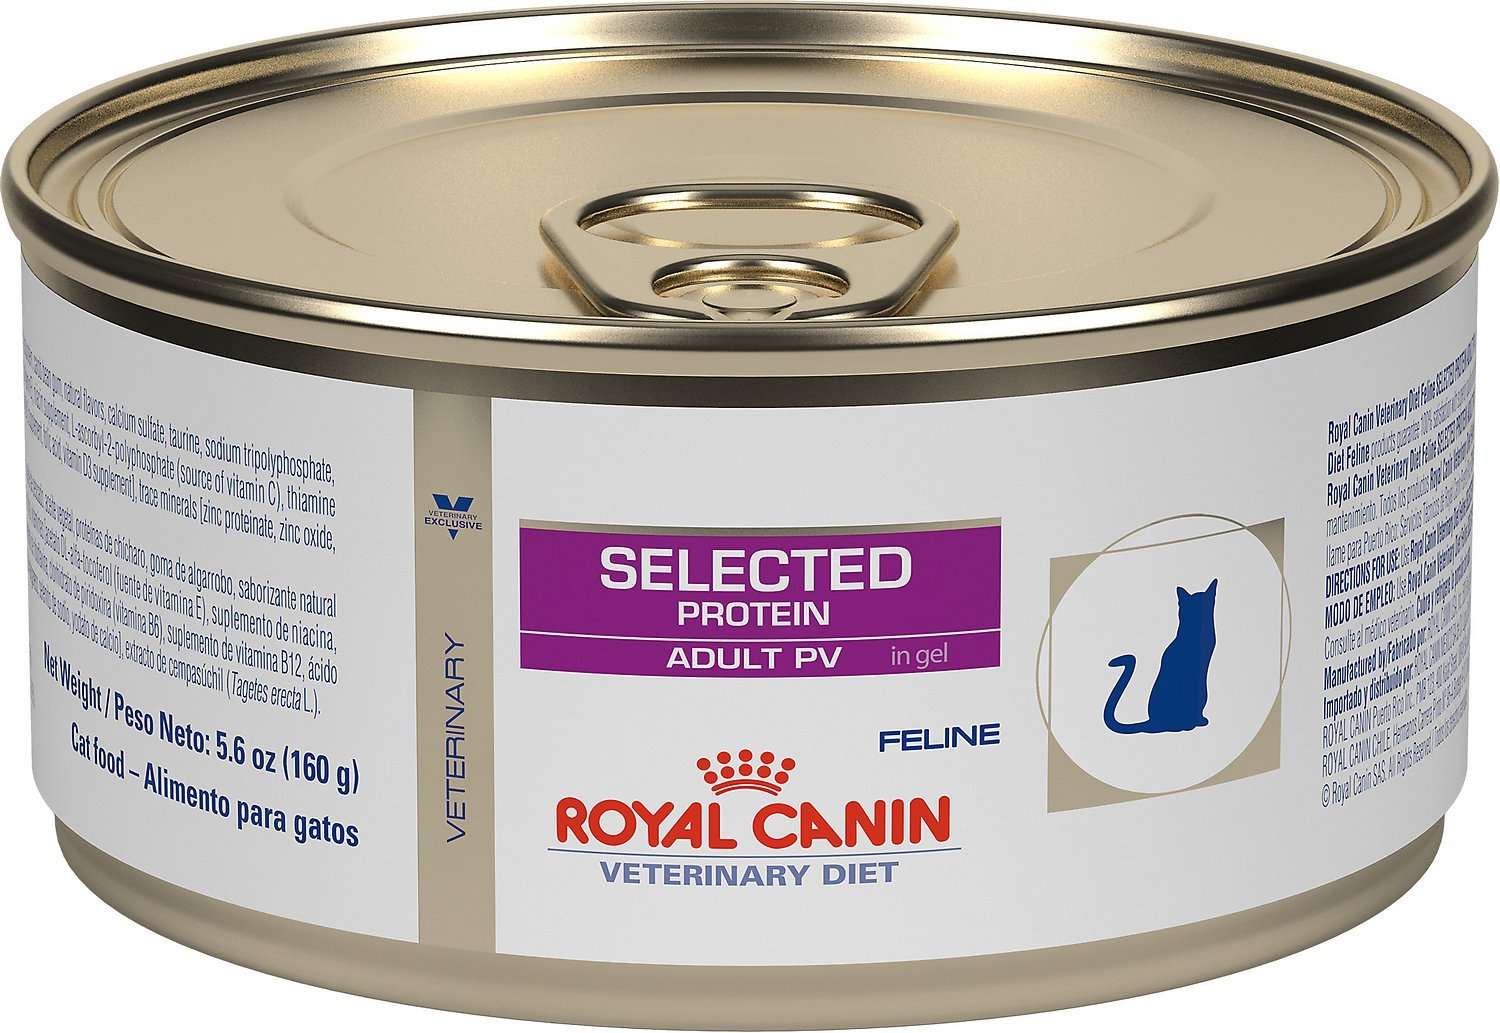 Royal Canin Veterinary Diet Selected Protein Adult PV in ...